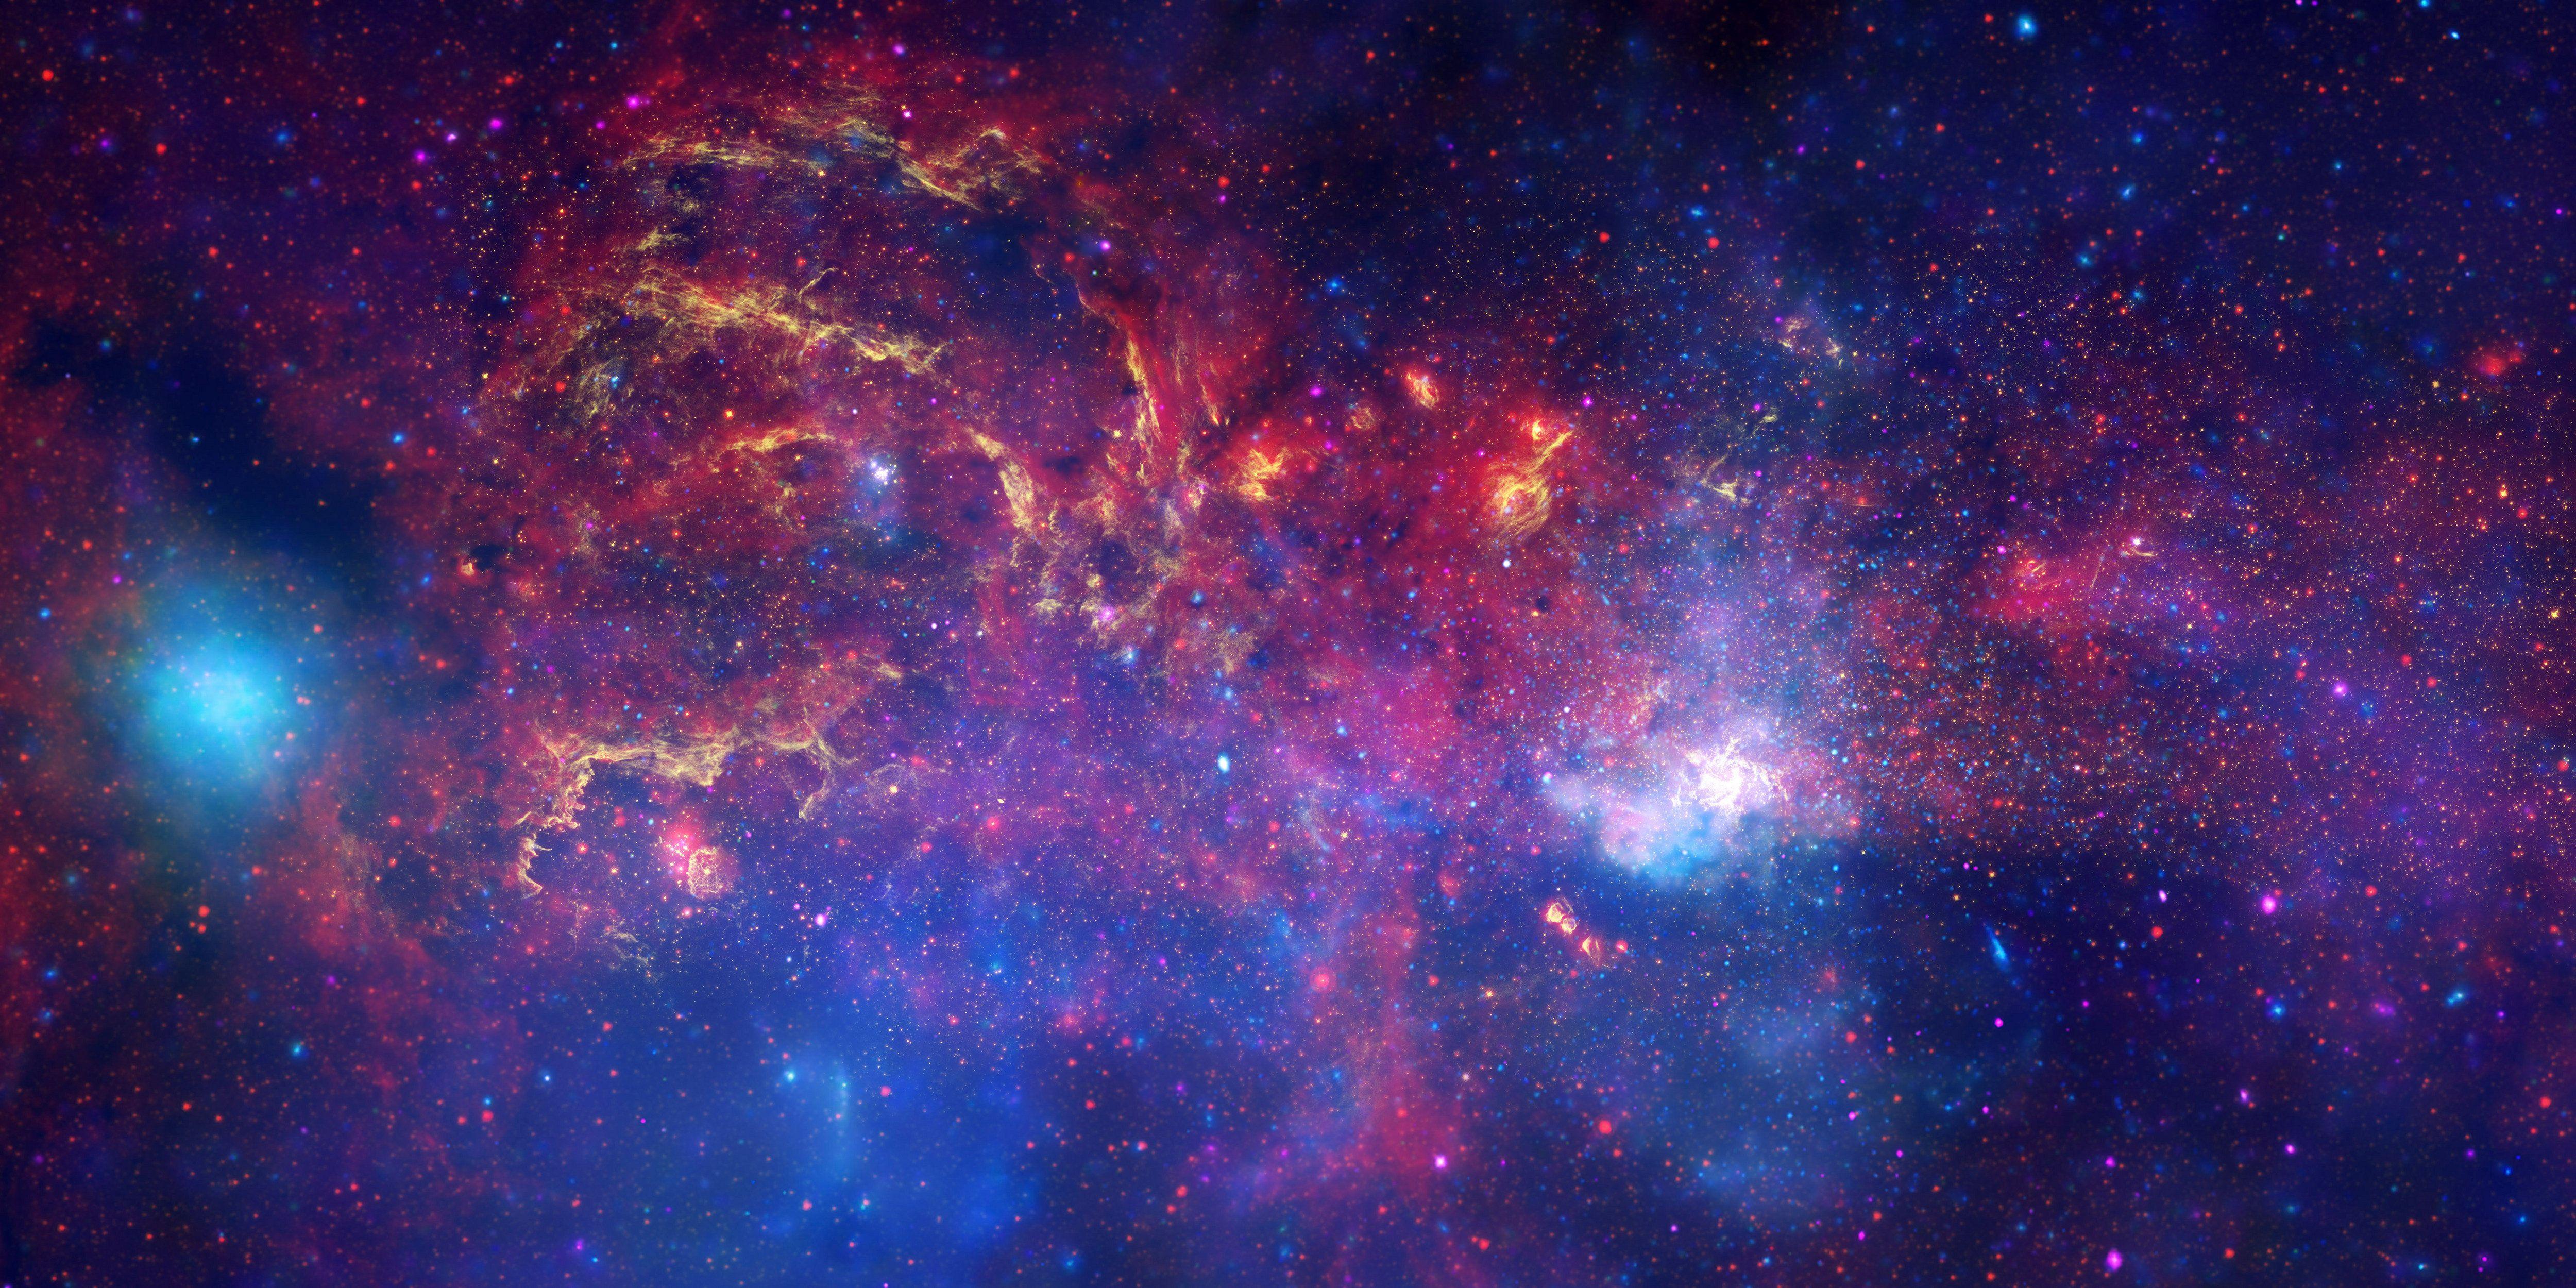 Free HD Universe Background For Desktops, Laptops and Tablets